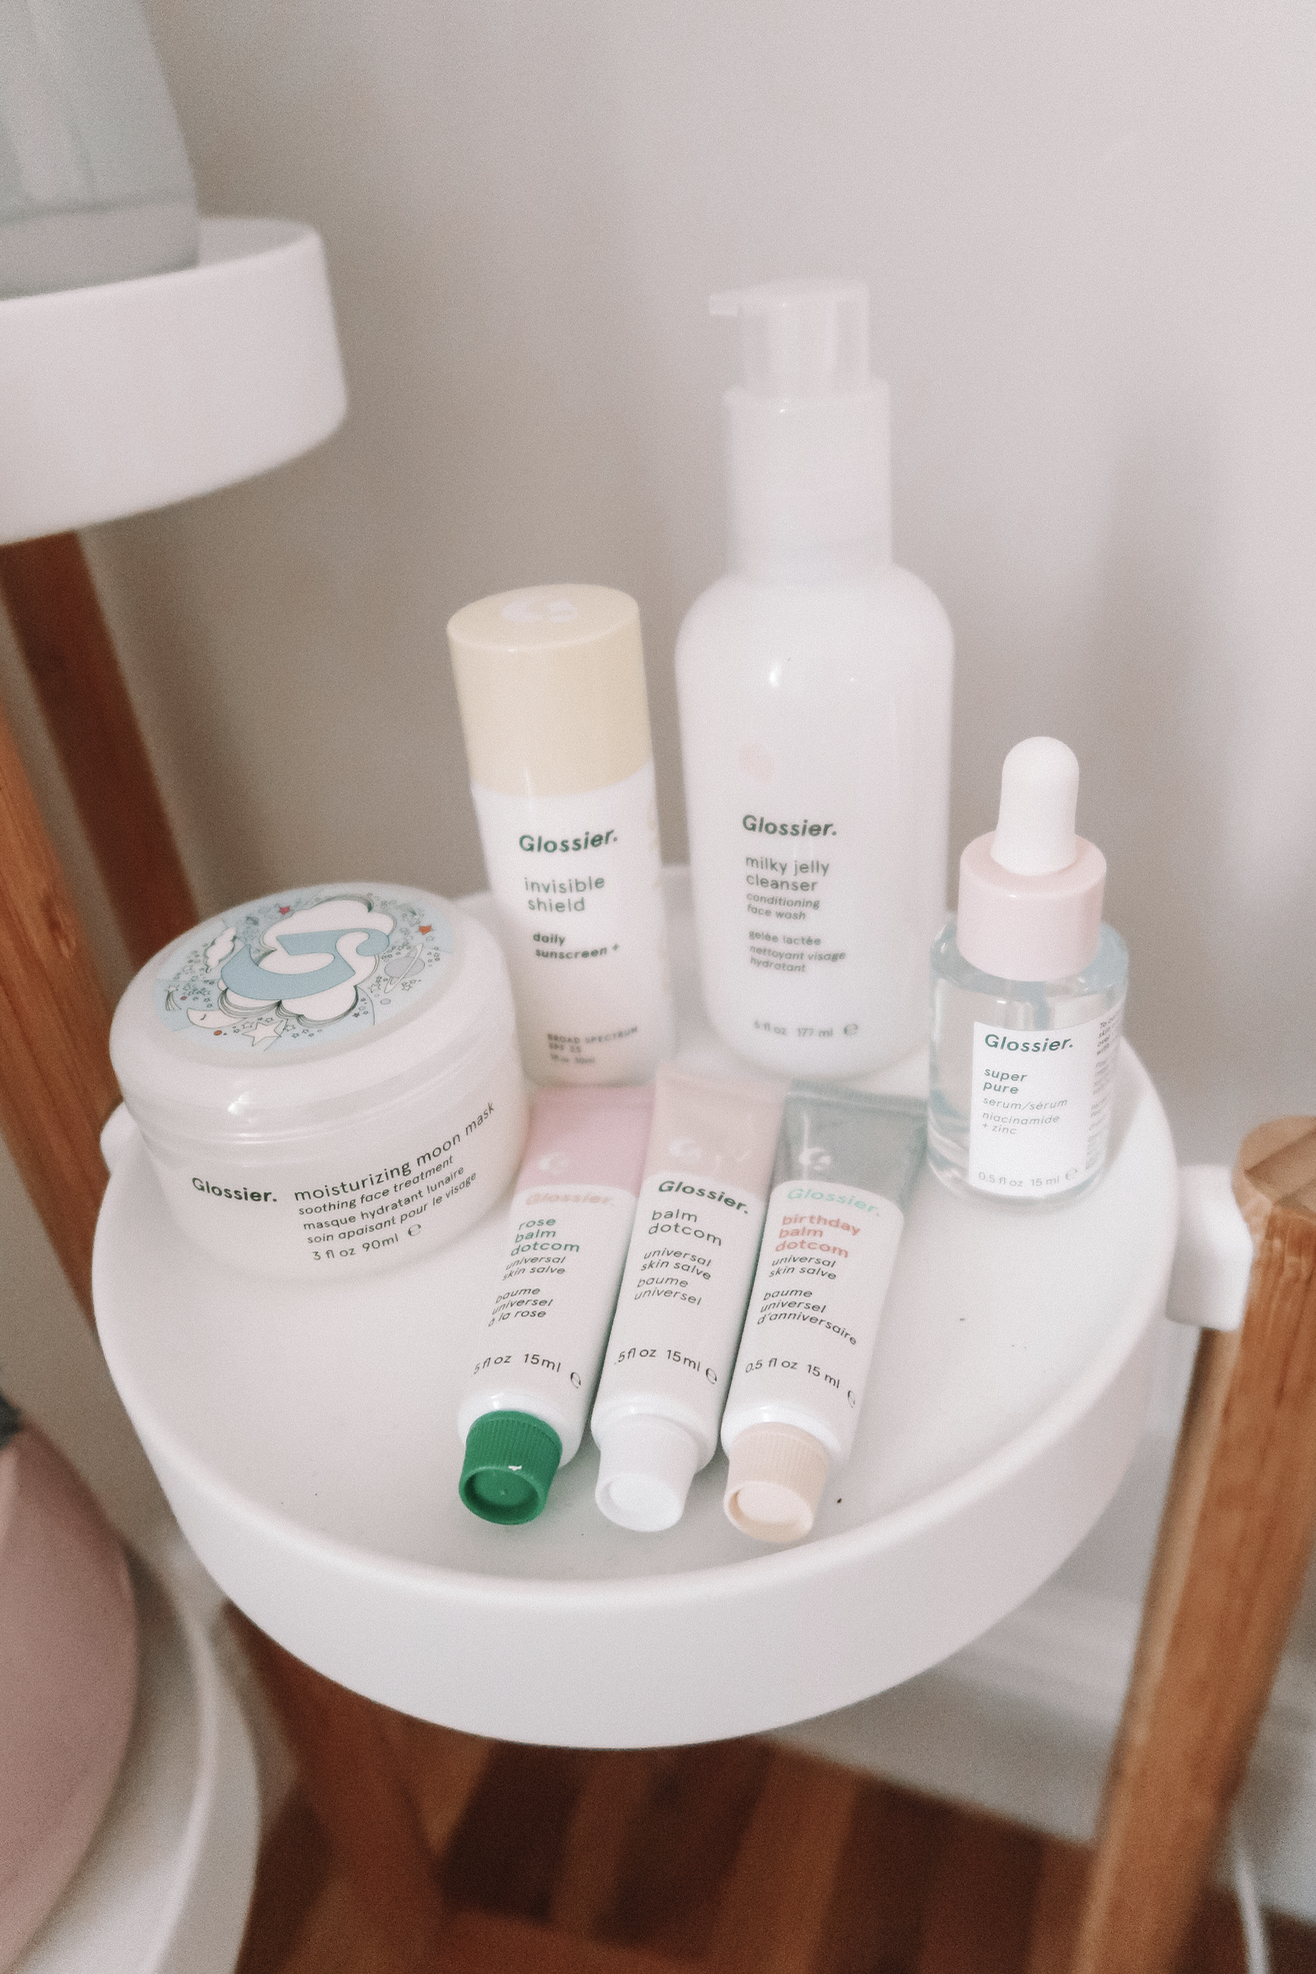 Glossier: Worth the Hype?